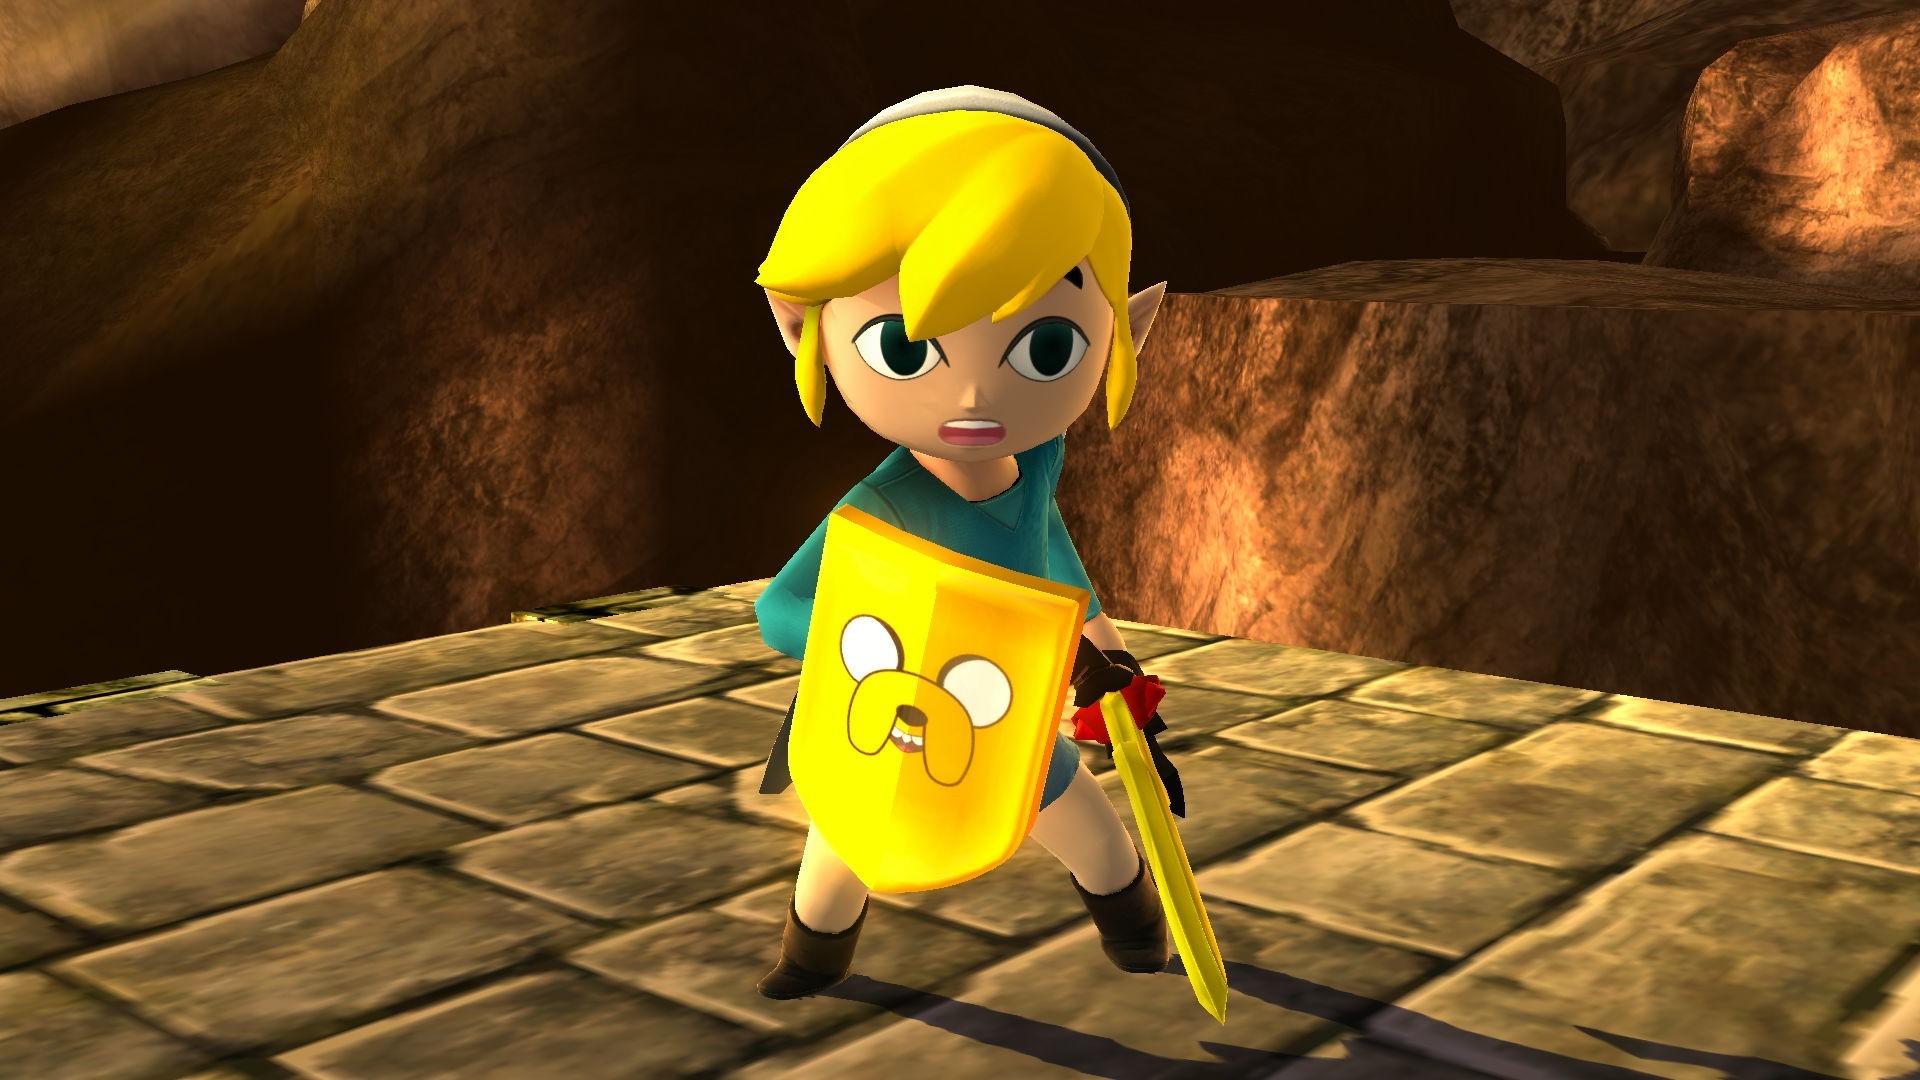 1920x1080 Fin The Toon Link Fin The Toon Link ...